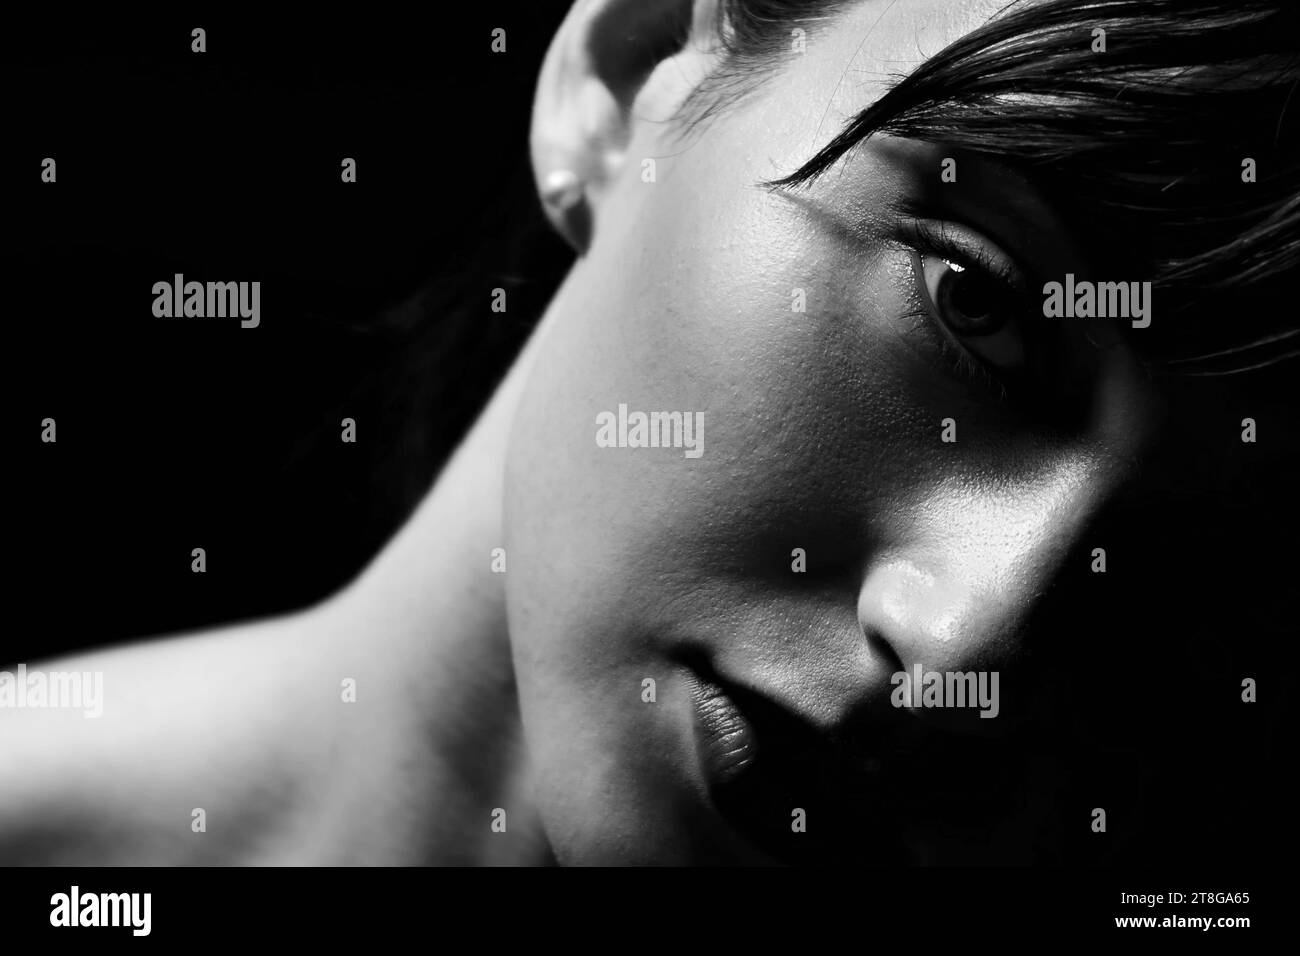 Unseeing eyes - a black and white face close-up portrait of a young dark-haired woman looking into the emptiness. Stock Photo